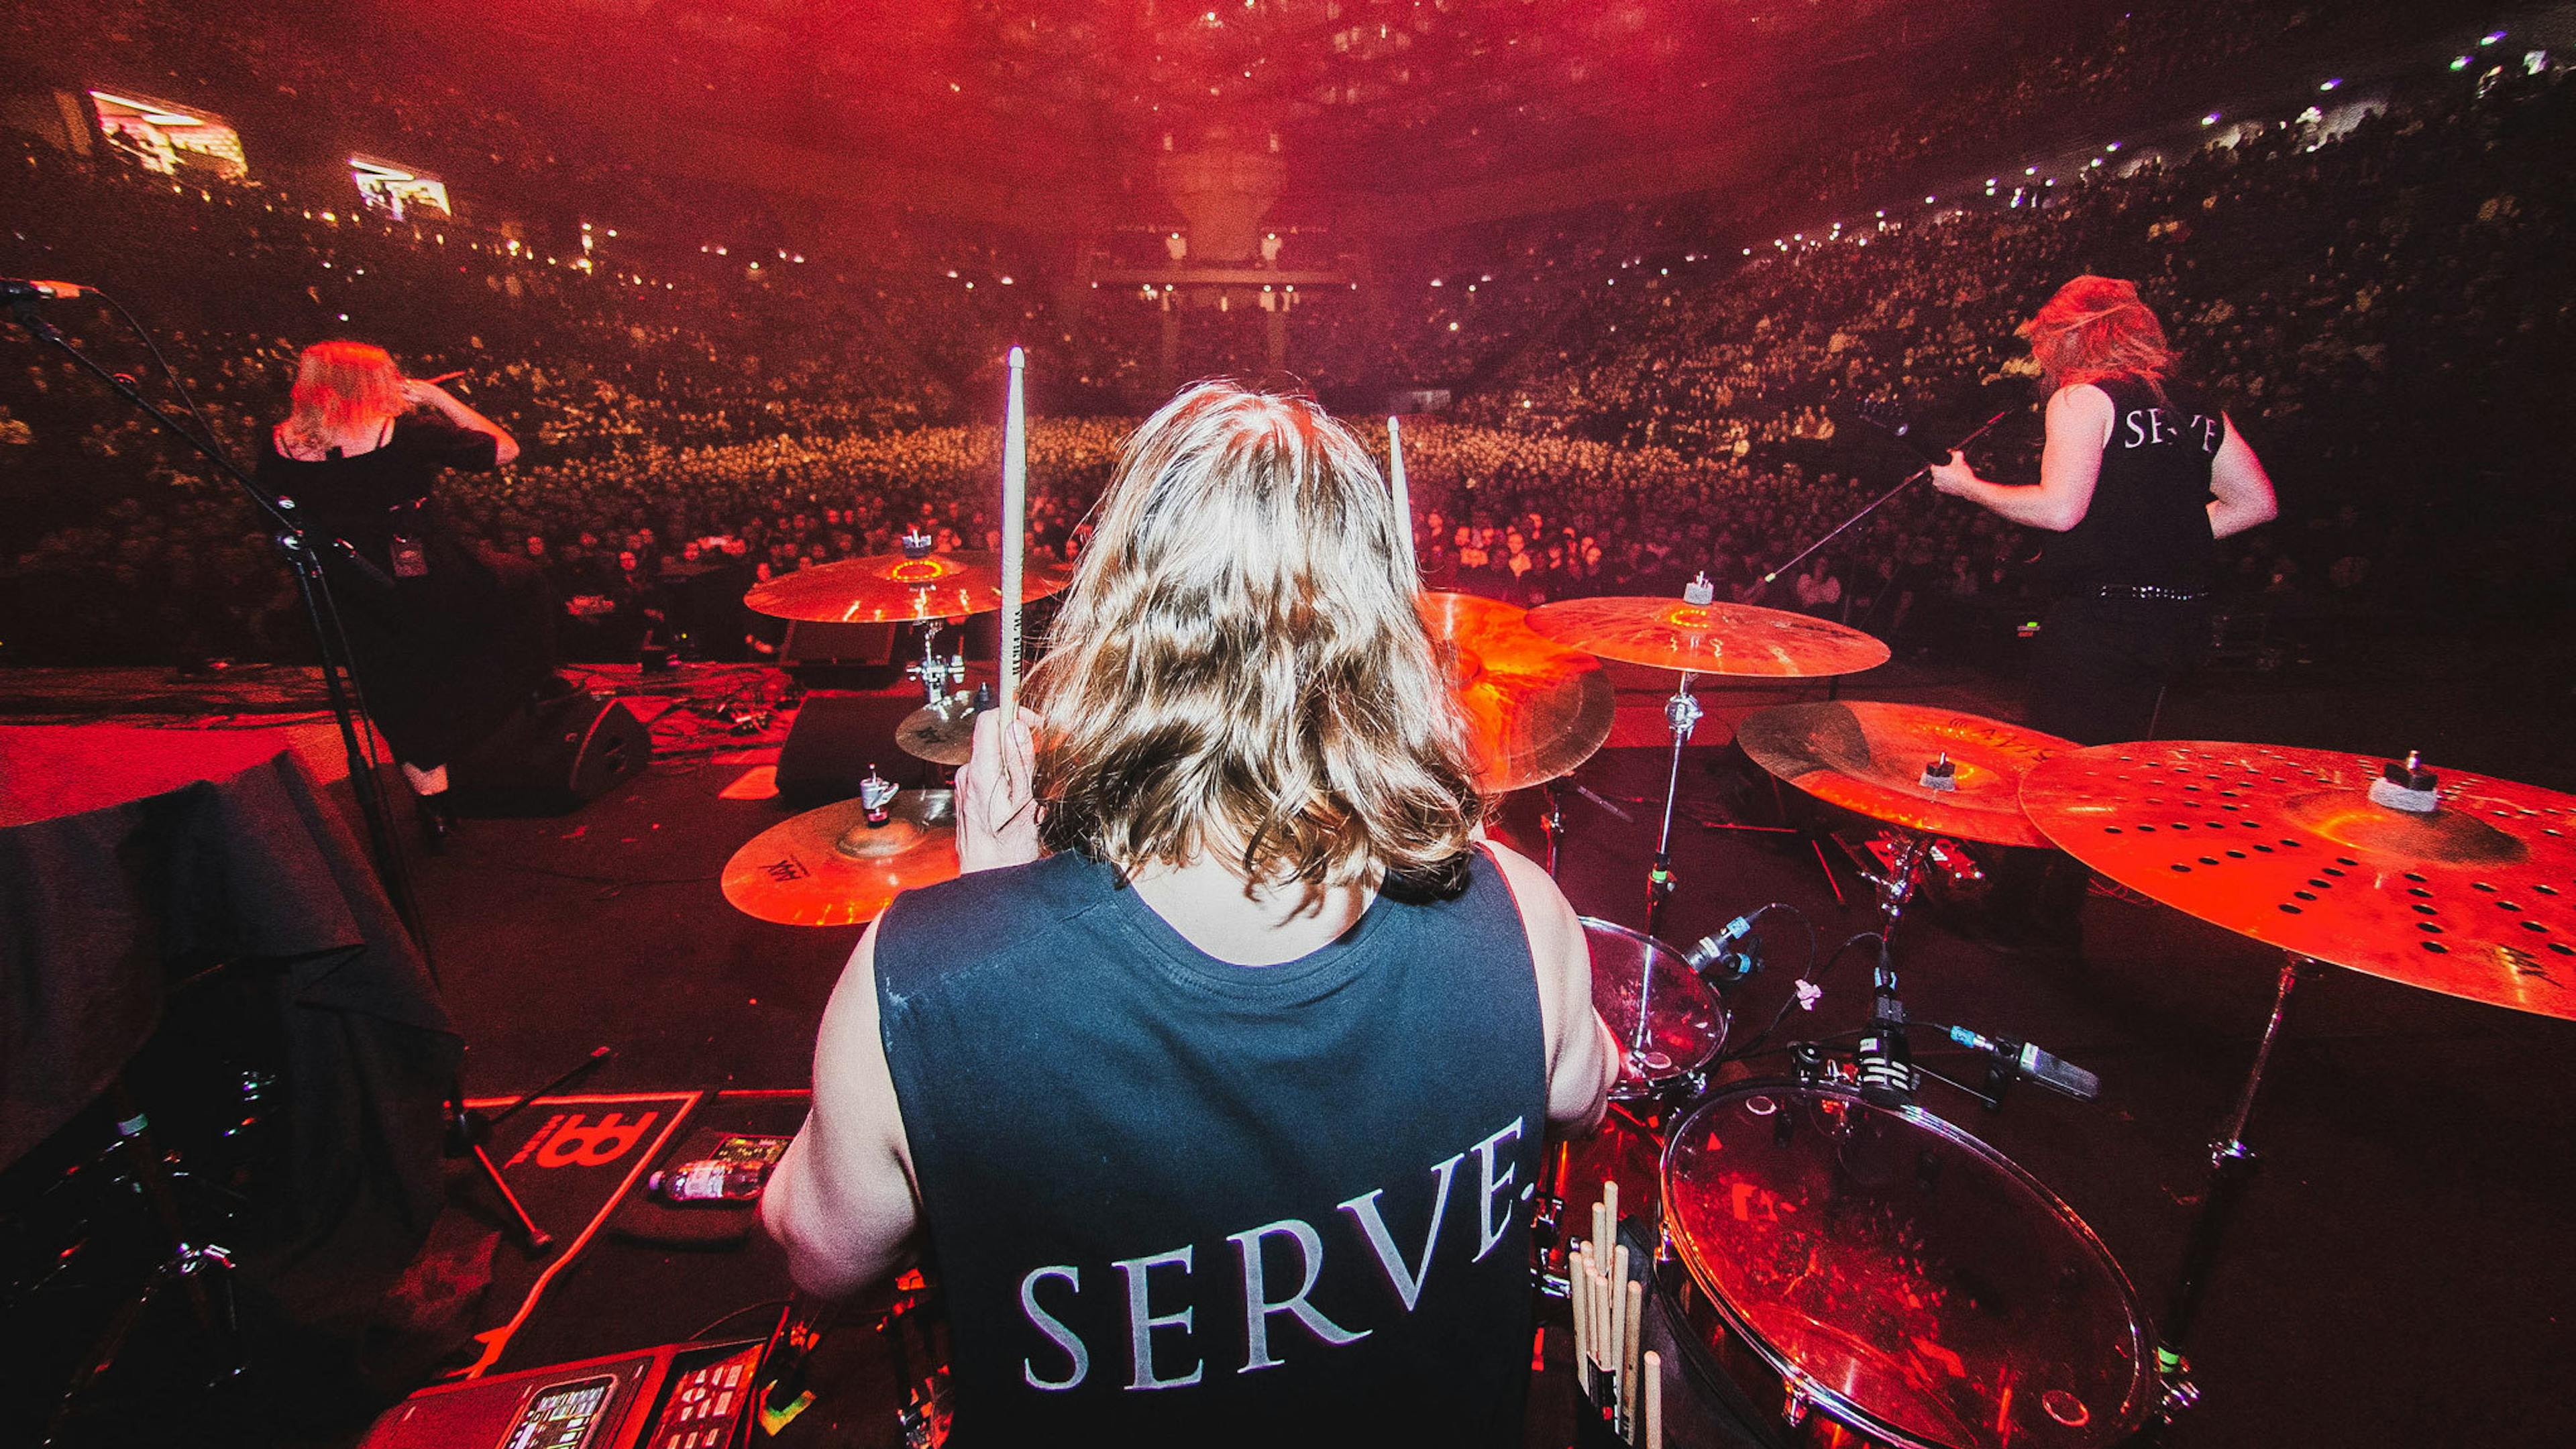 Employed To Serve have announced some of their biggest-ever headline shows